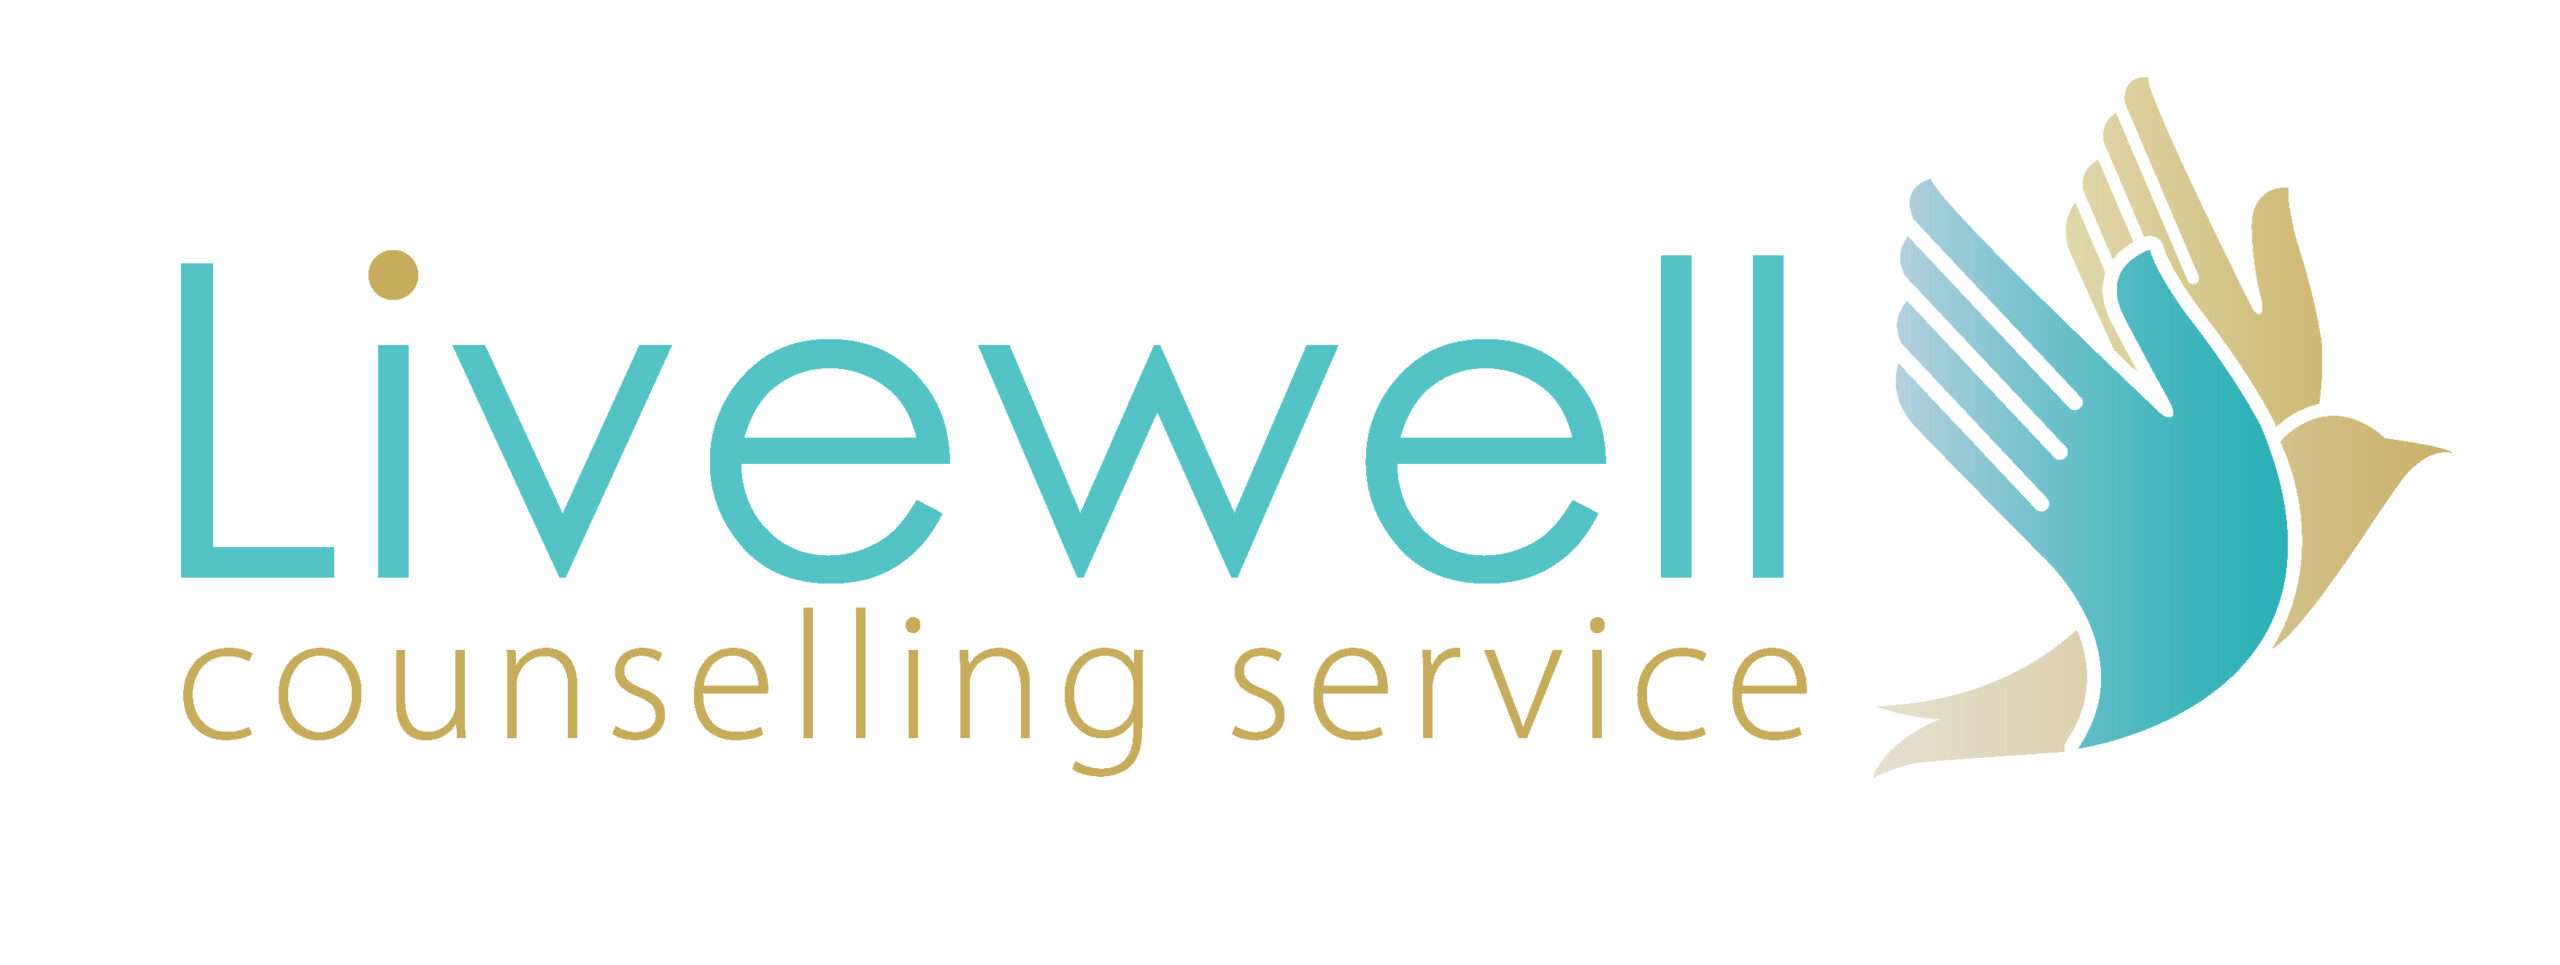 Supervision & Counselling Services - Livewell Counselling Services (Chorley and Online in the UK)